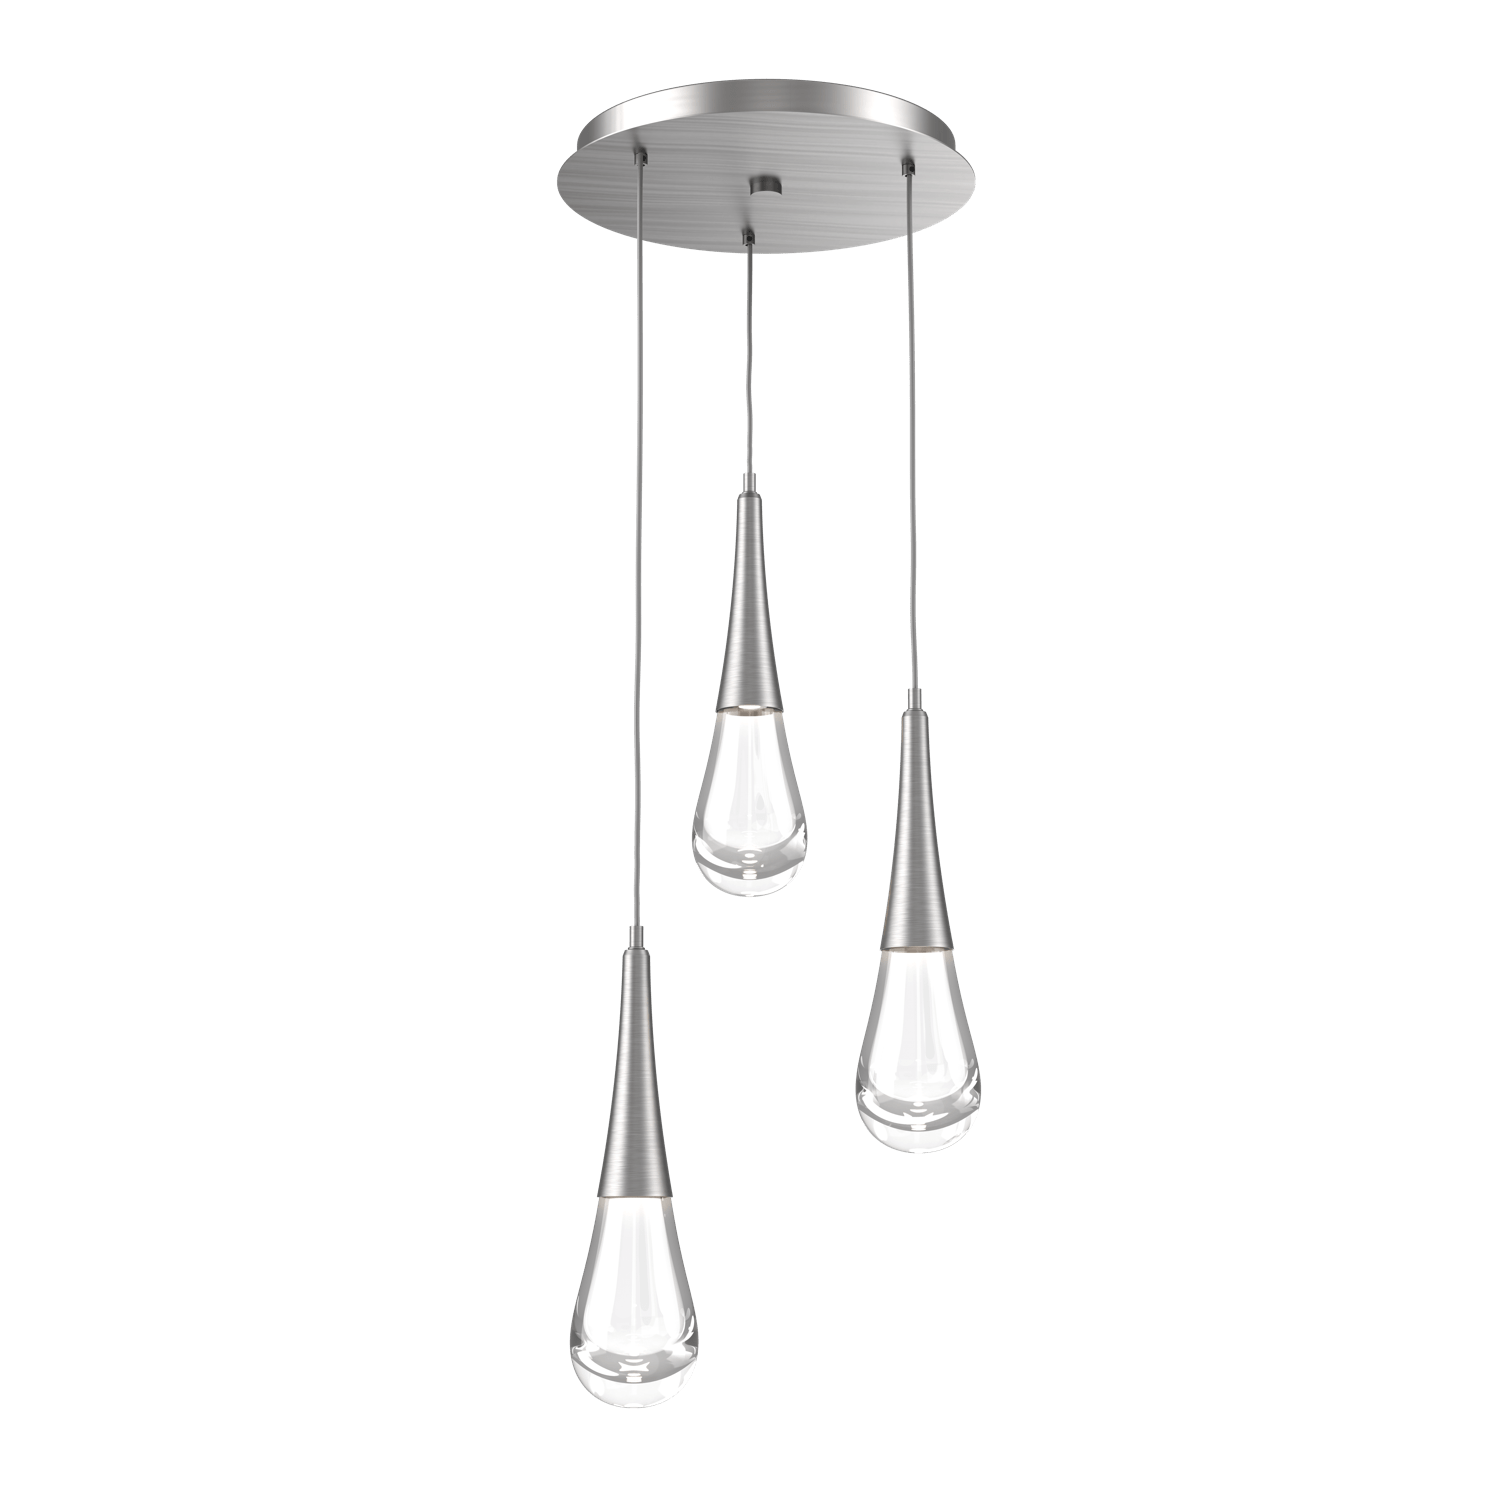 CHB0078-03-SN-Hammerton-Studio-Raindrop-3-light-round-pendant-chandelier-with-satin-nickel-finish-and-clear-blown-glass-shades-and-LED-lamping